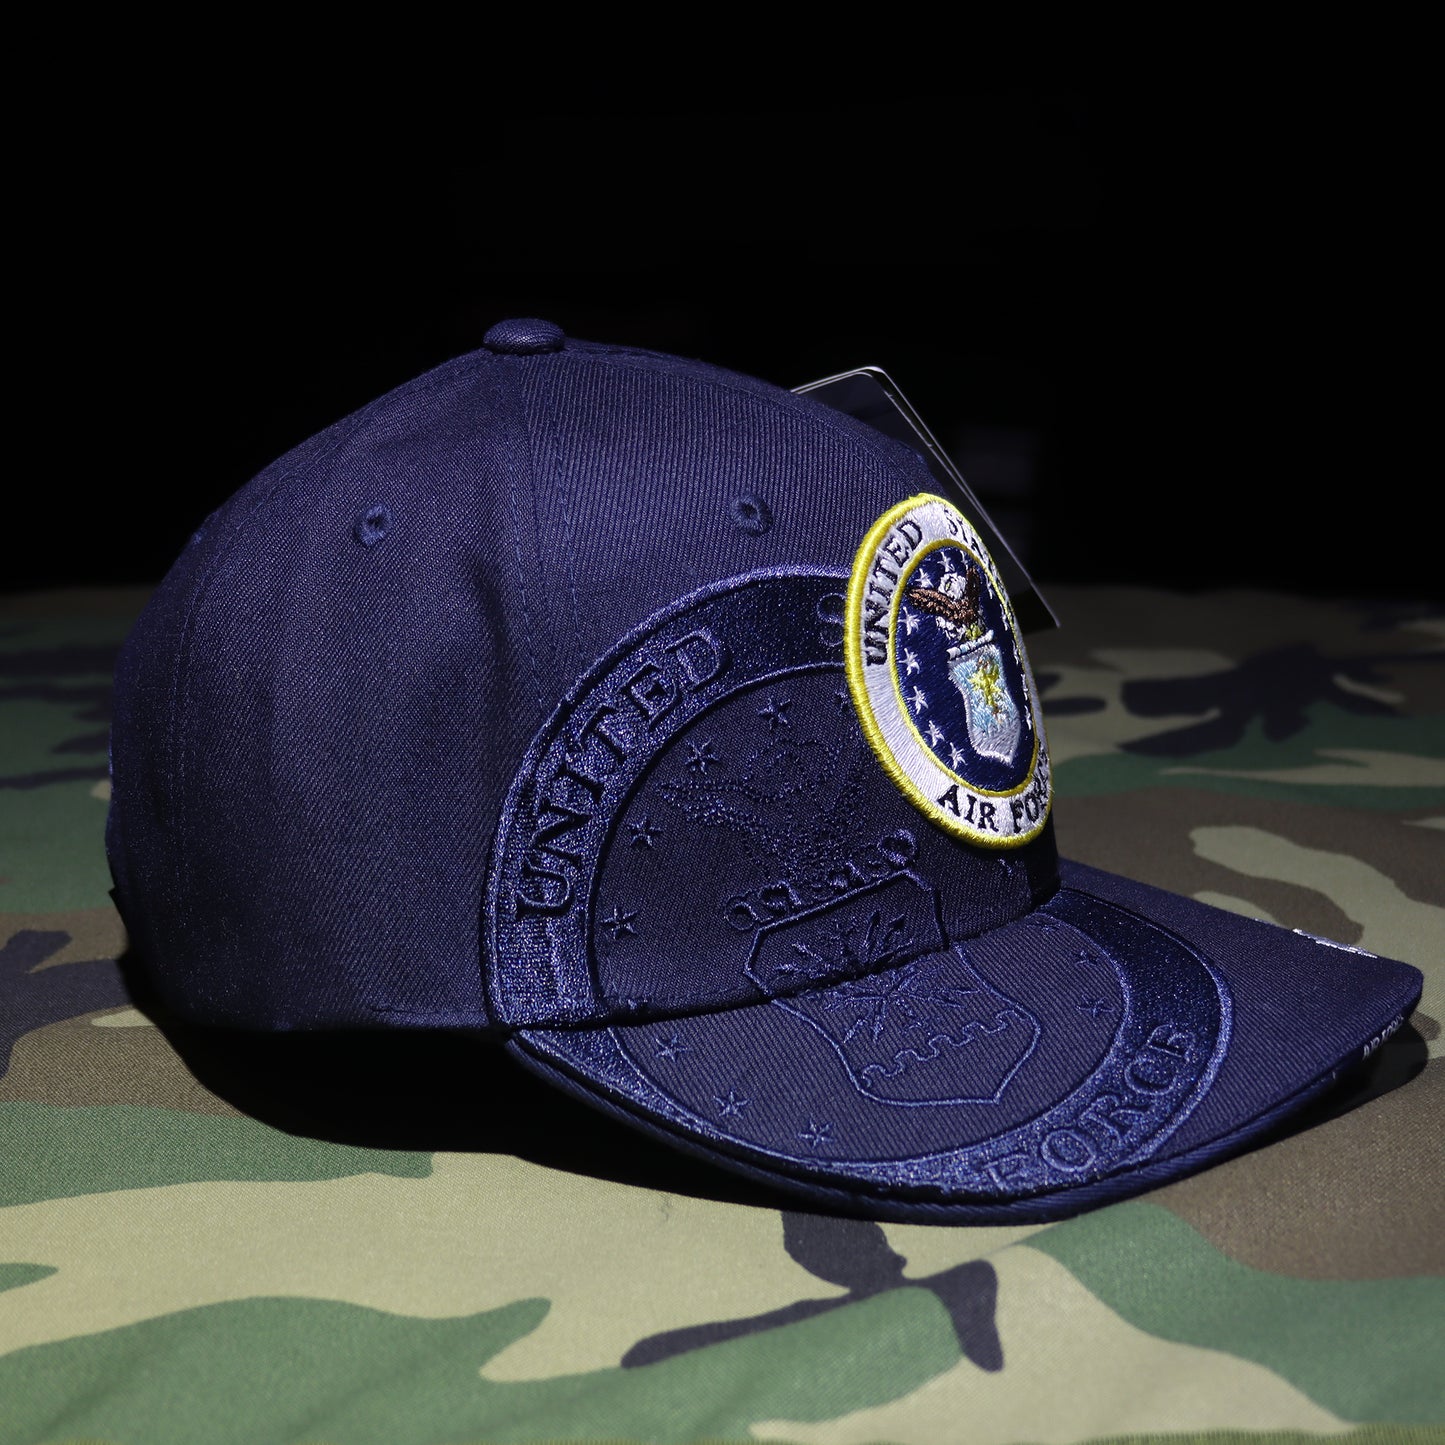 US Airforce Logo Cap with shadow effect